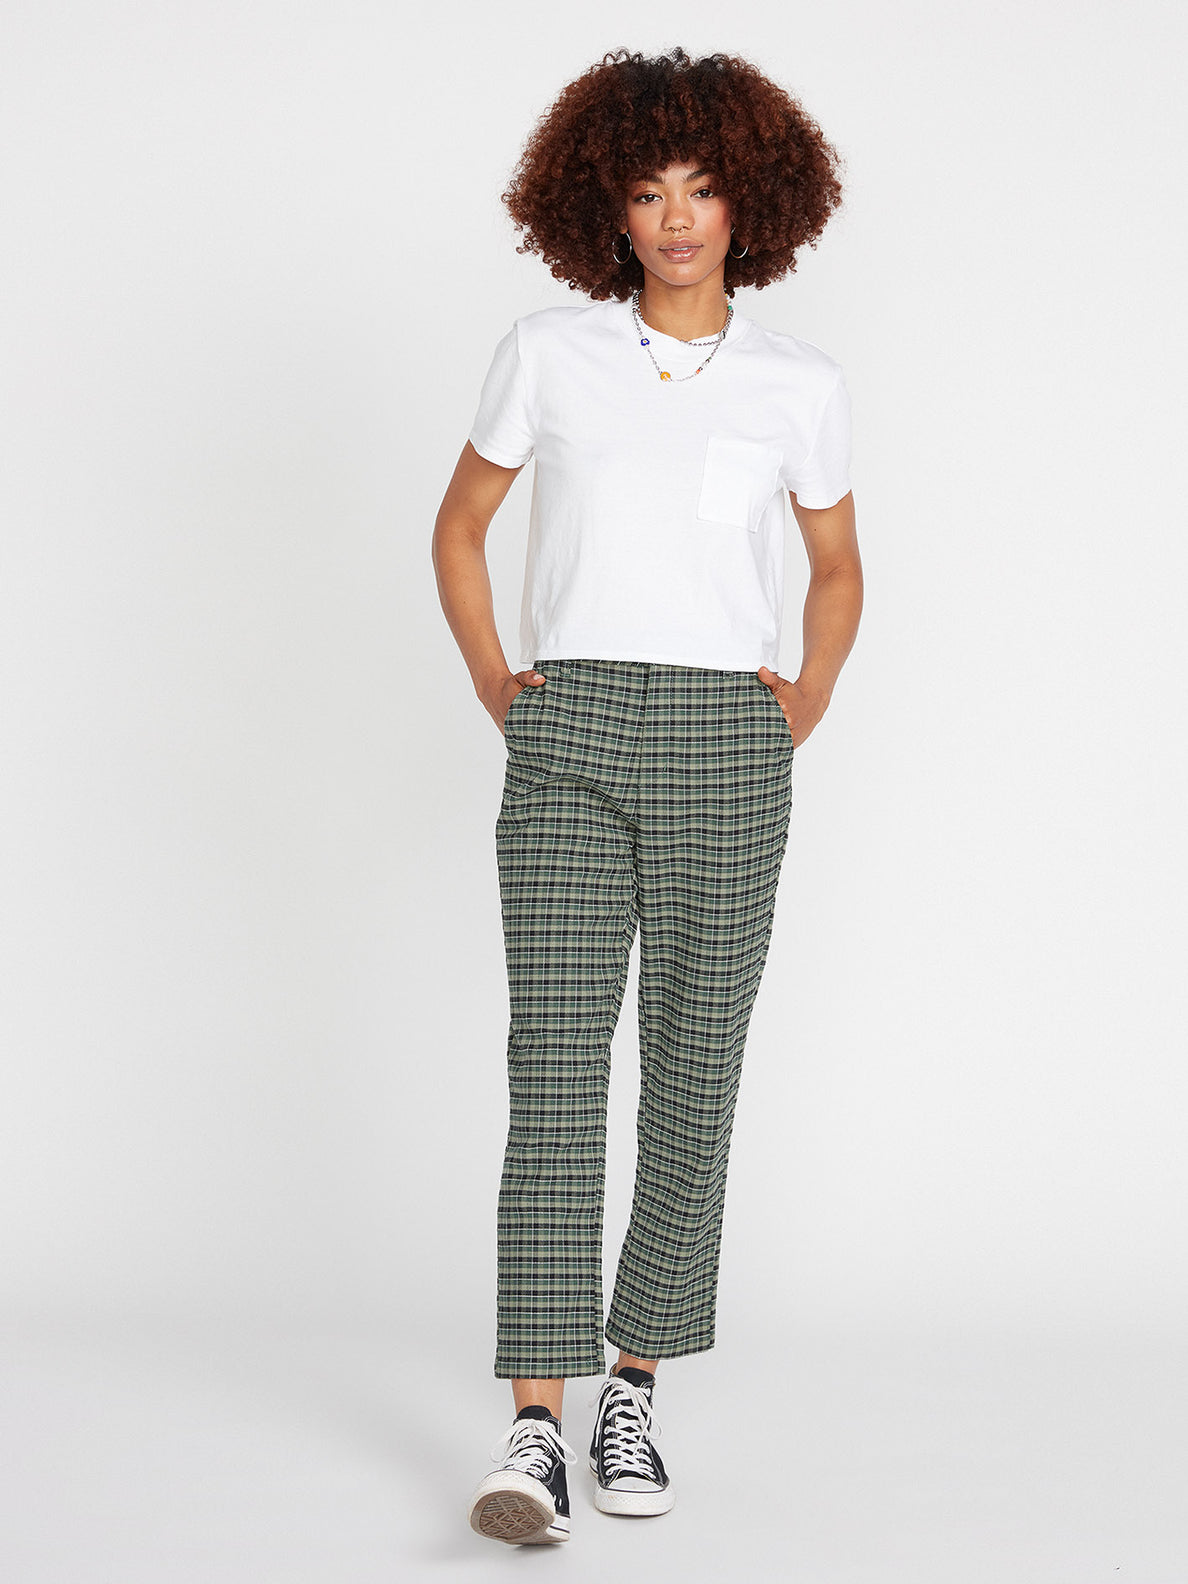 Frochickie Highrise Trousers - DARK PINE (B1131809_DPN) [F]